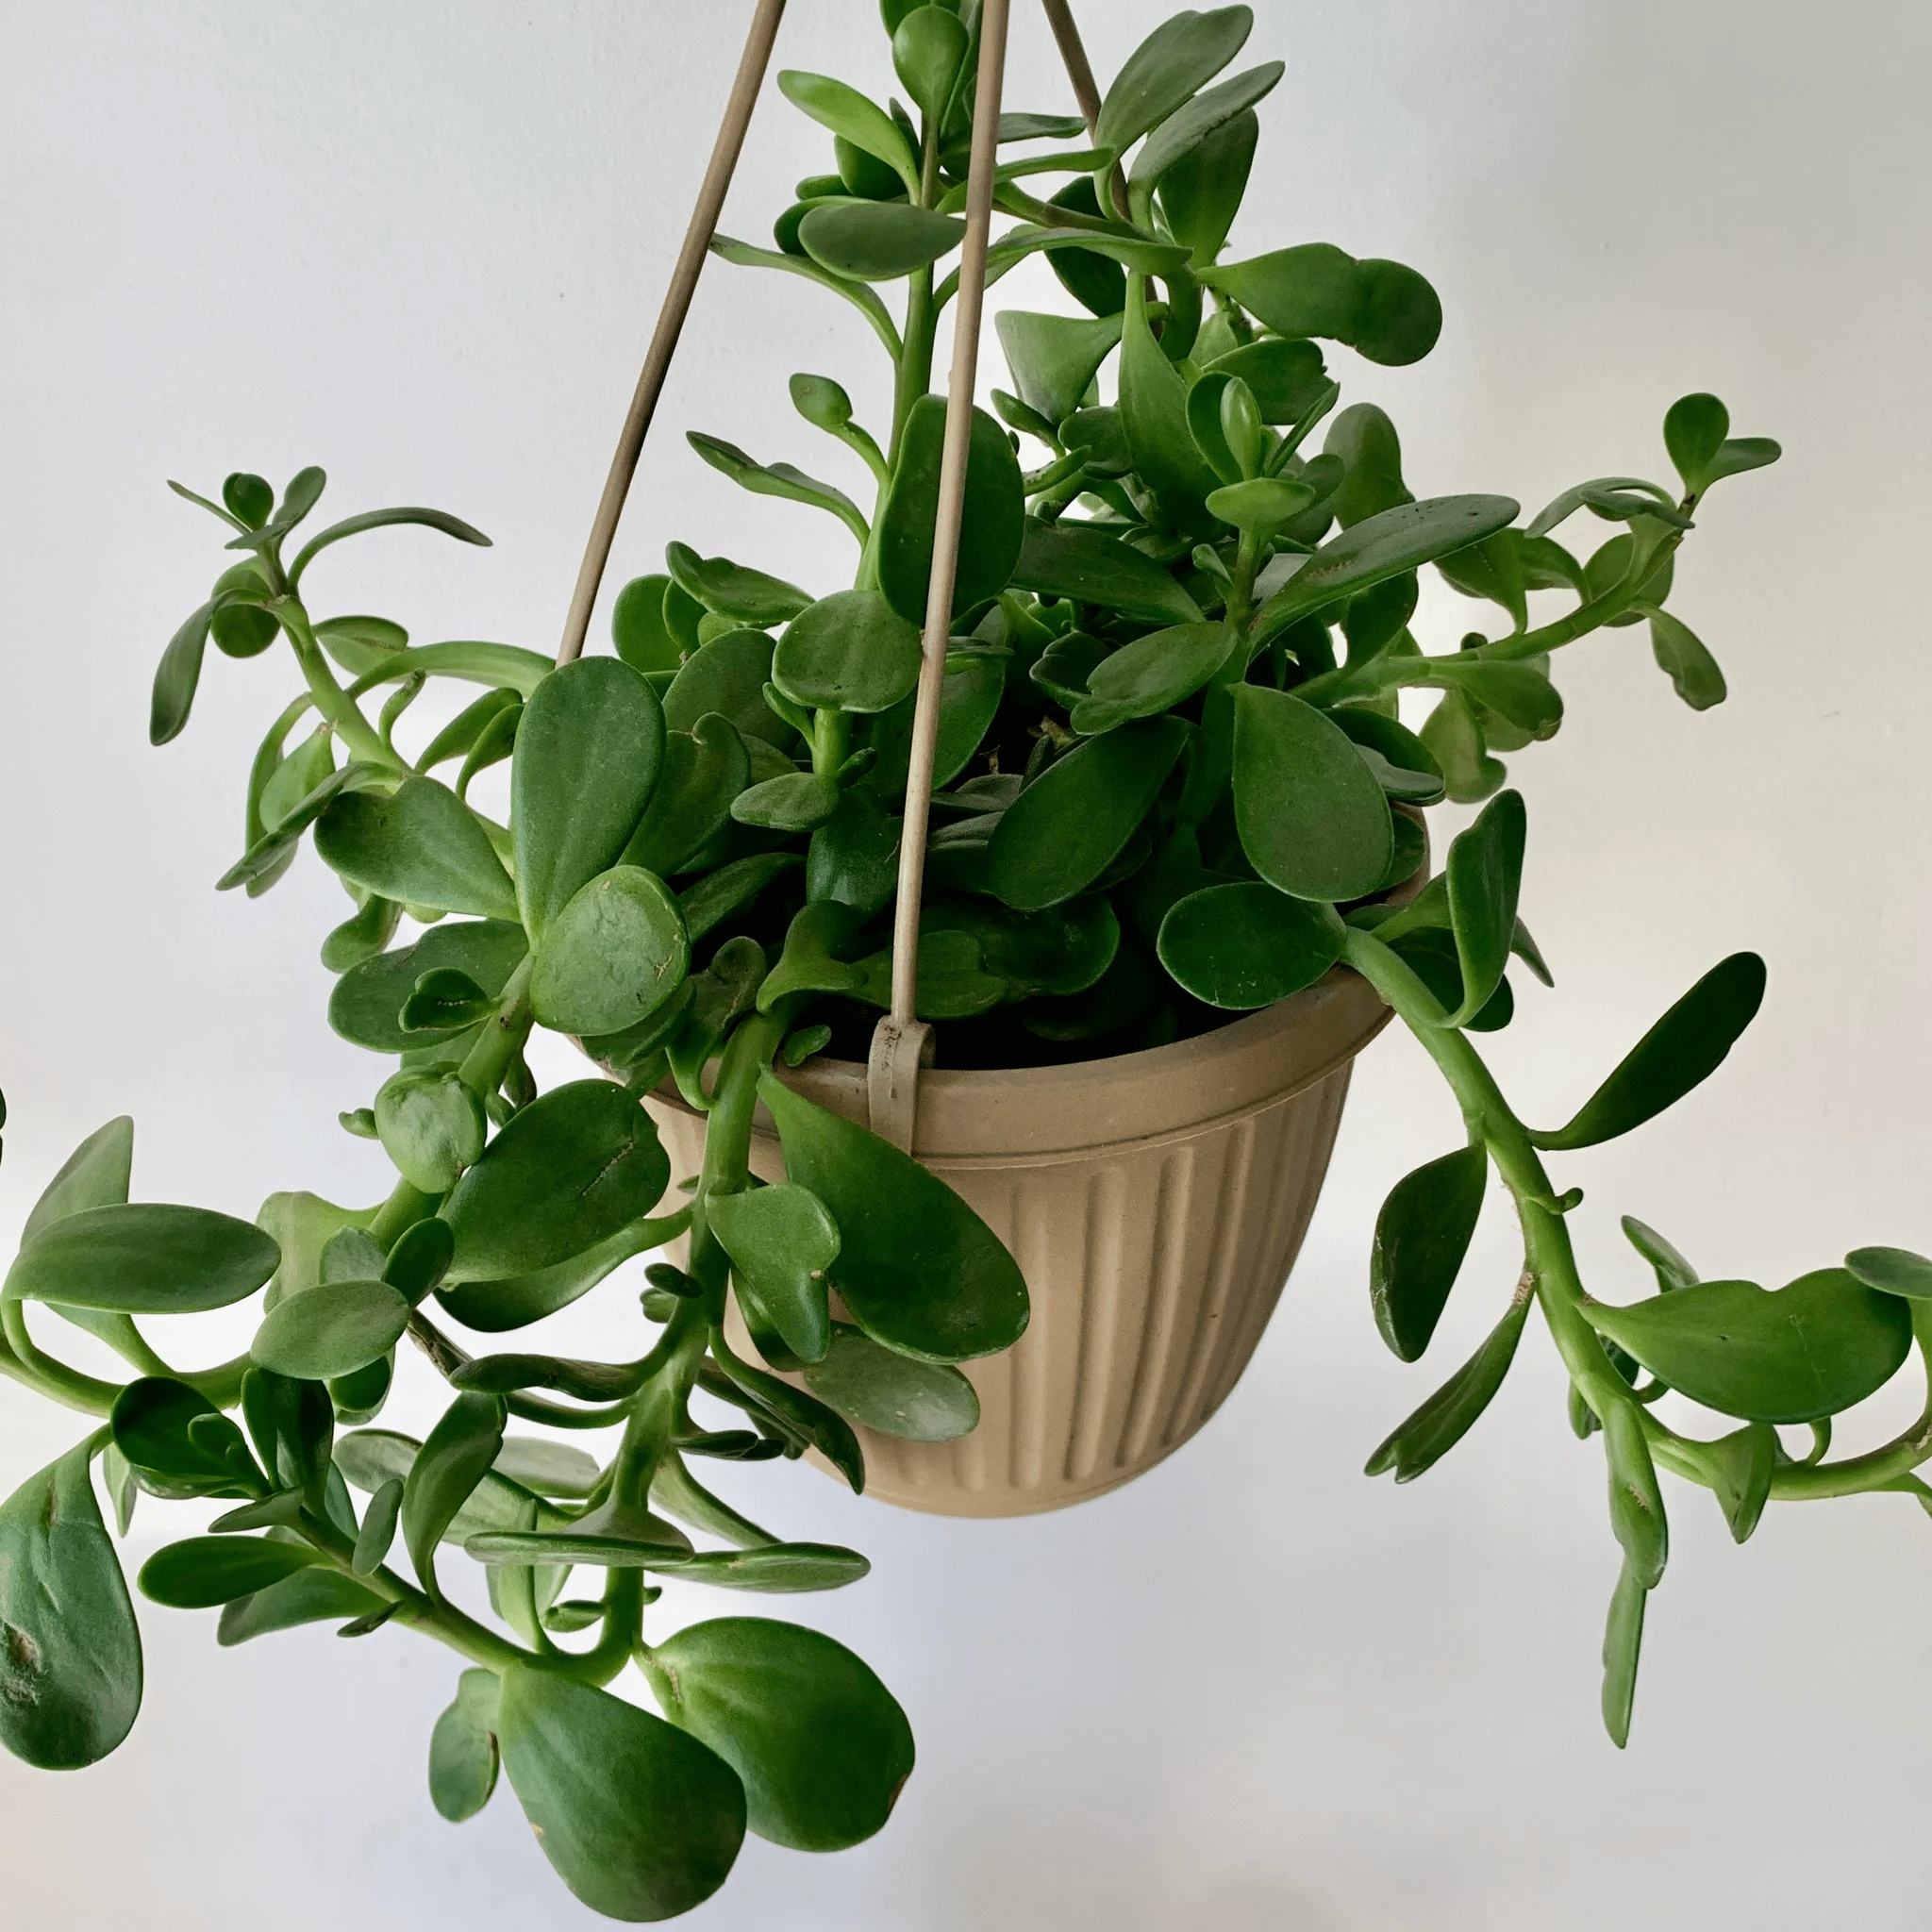 Trailing jade plant with hanging vines